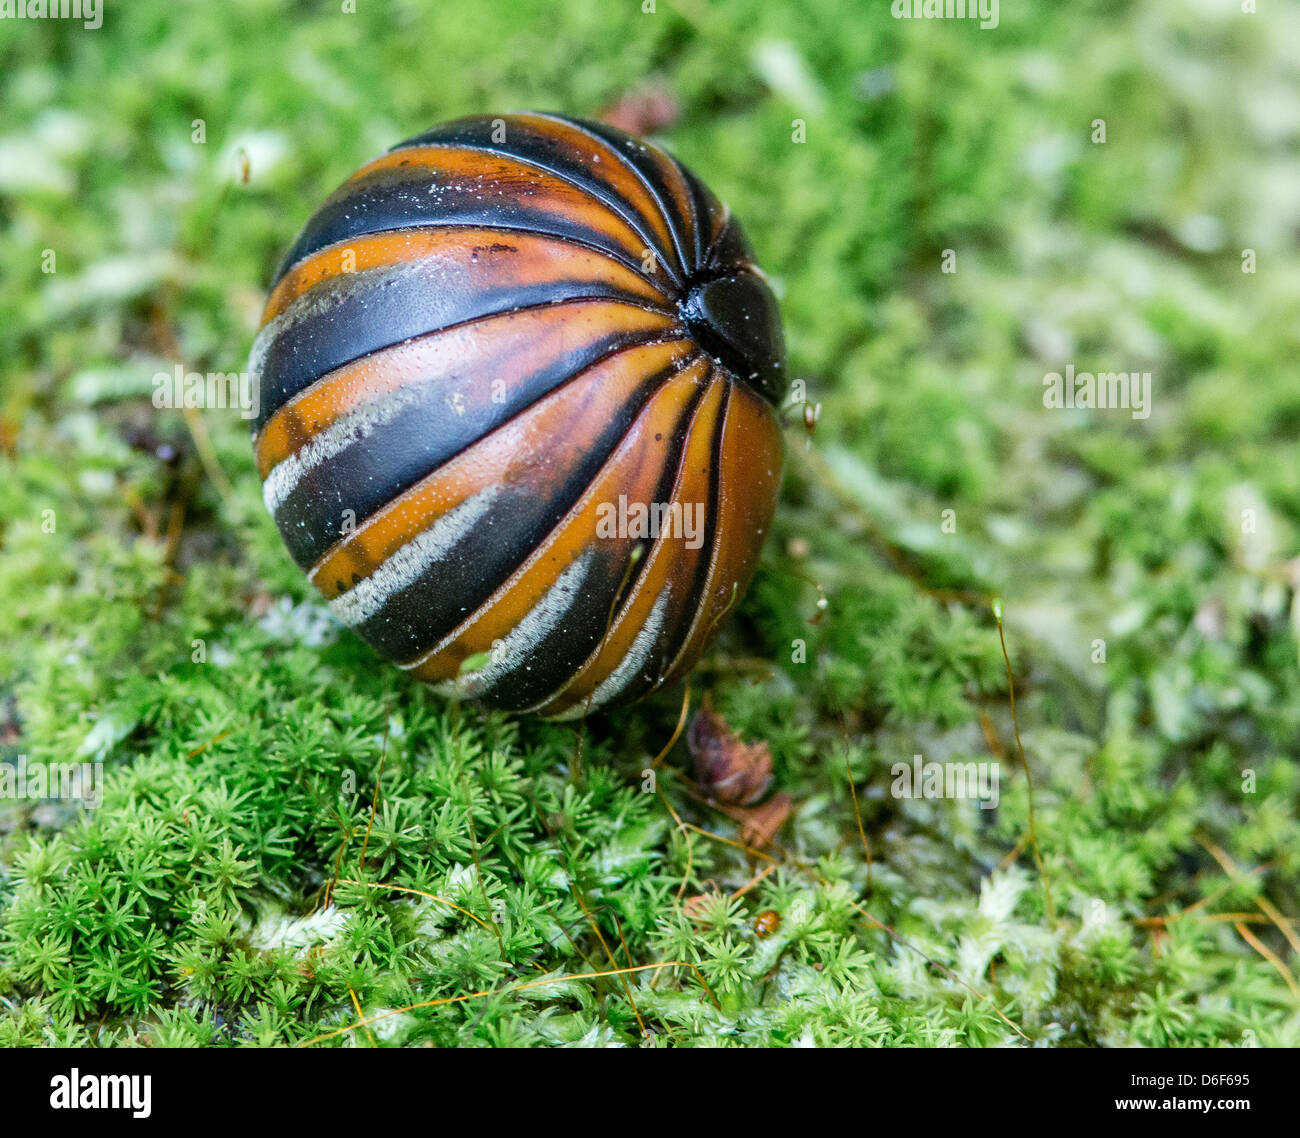 PIll Millipedes ( Sphaerotheriida ) curl up into a tight perfectly spherical ball when alarmed Kinabatangan River Borneo Stock Photo